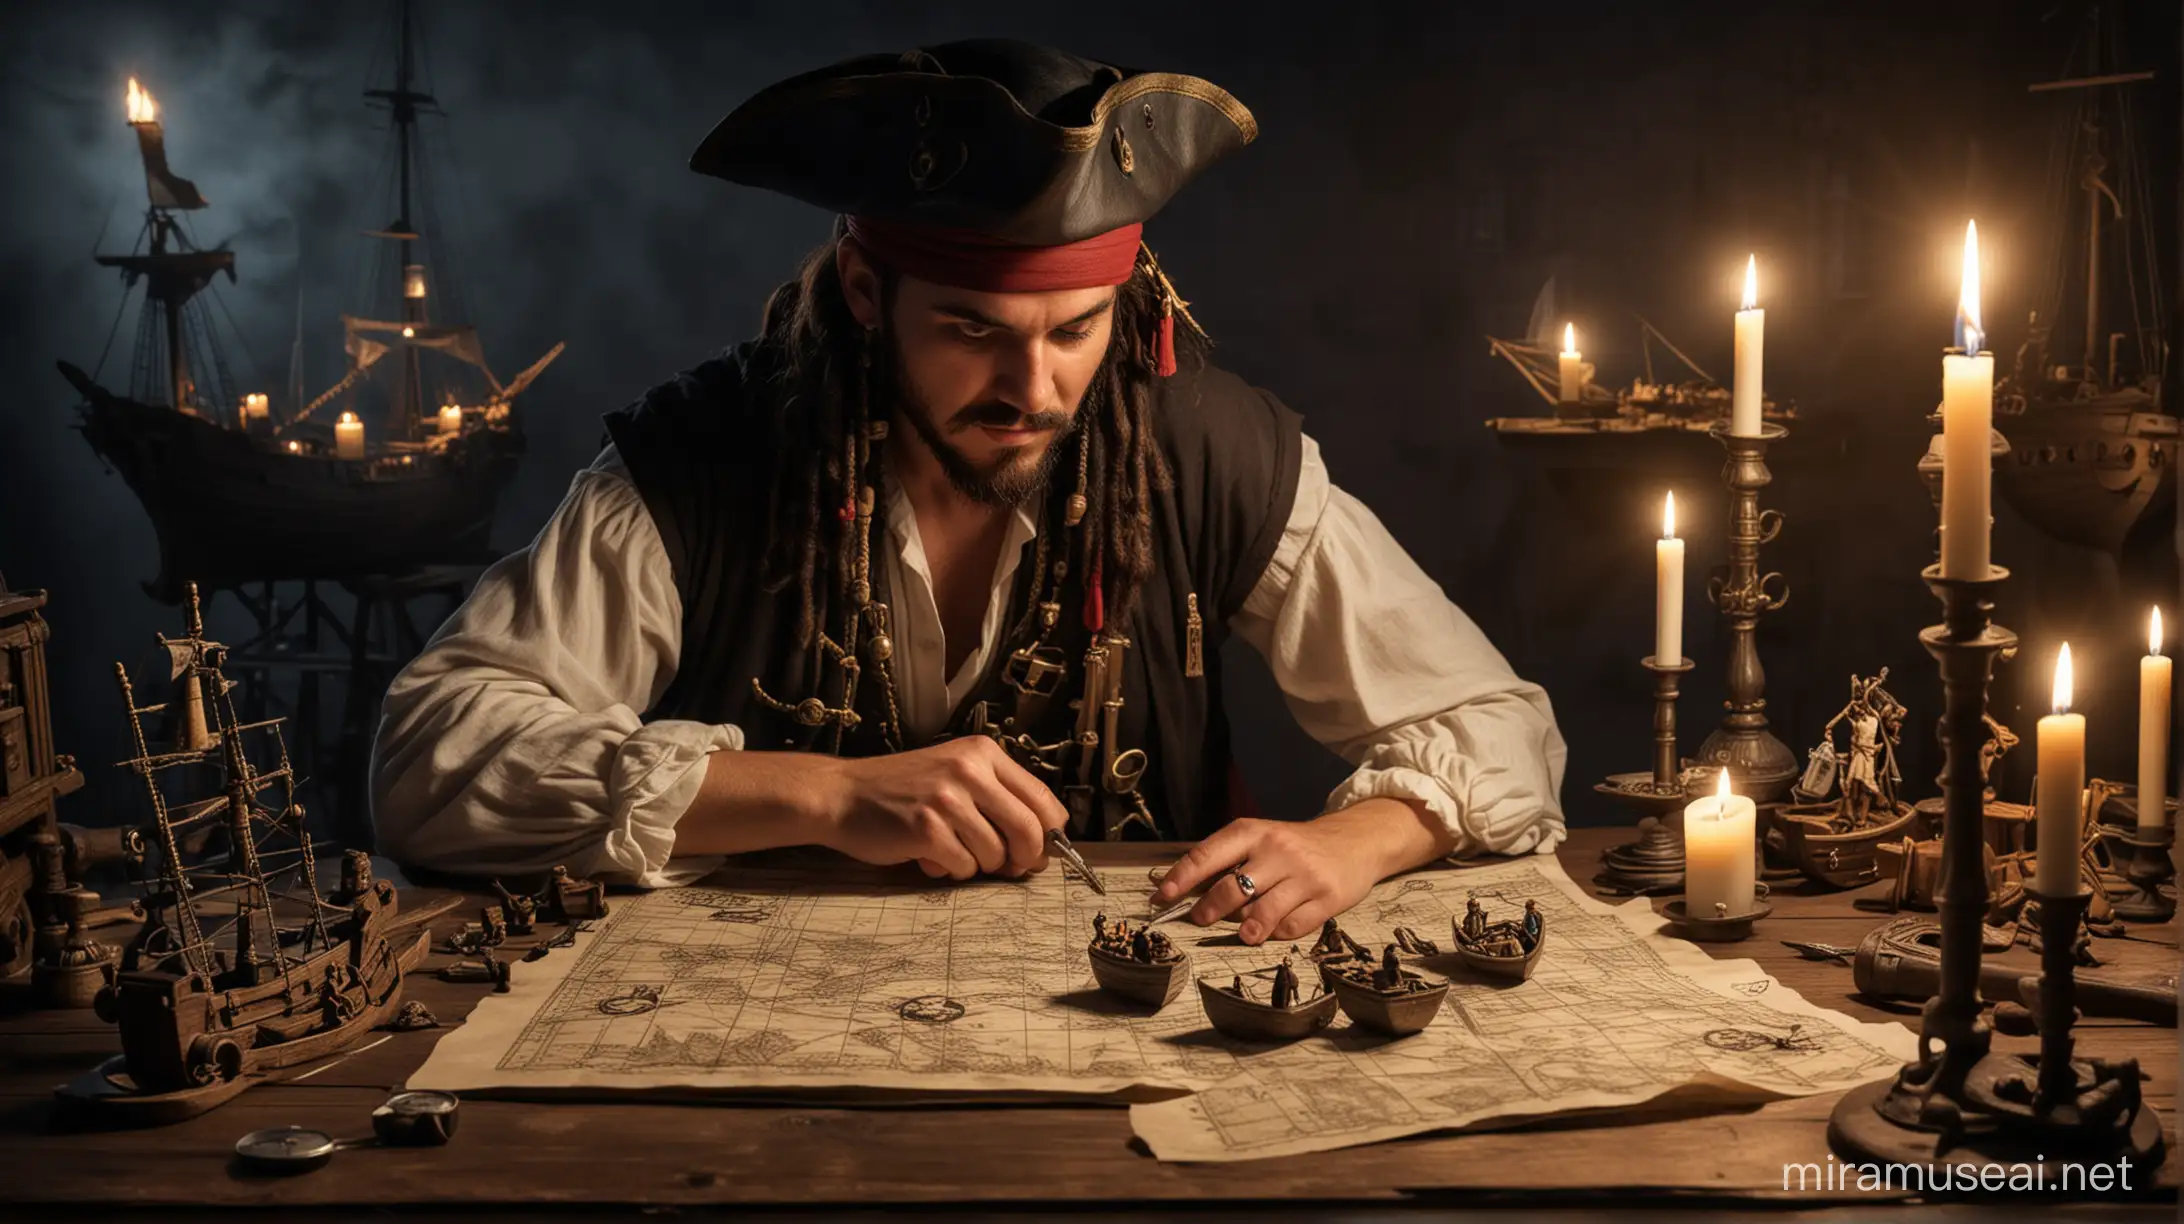 A pirate plotting a course for his pirate ship in a dark room under candle light using a compass, ruler and miniature ships